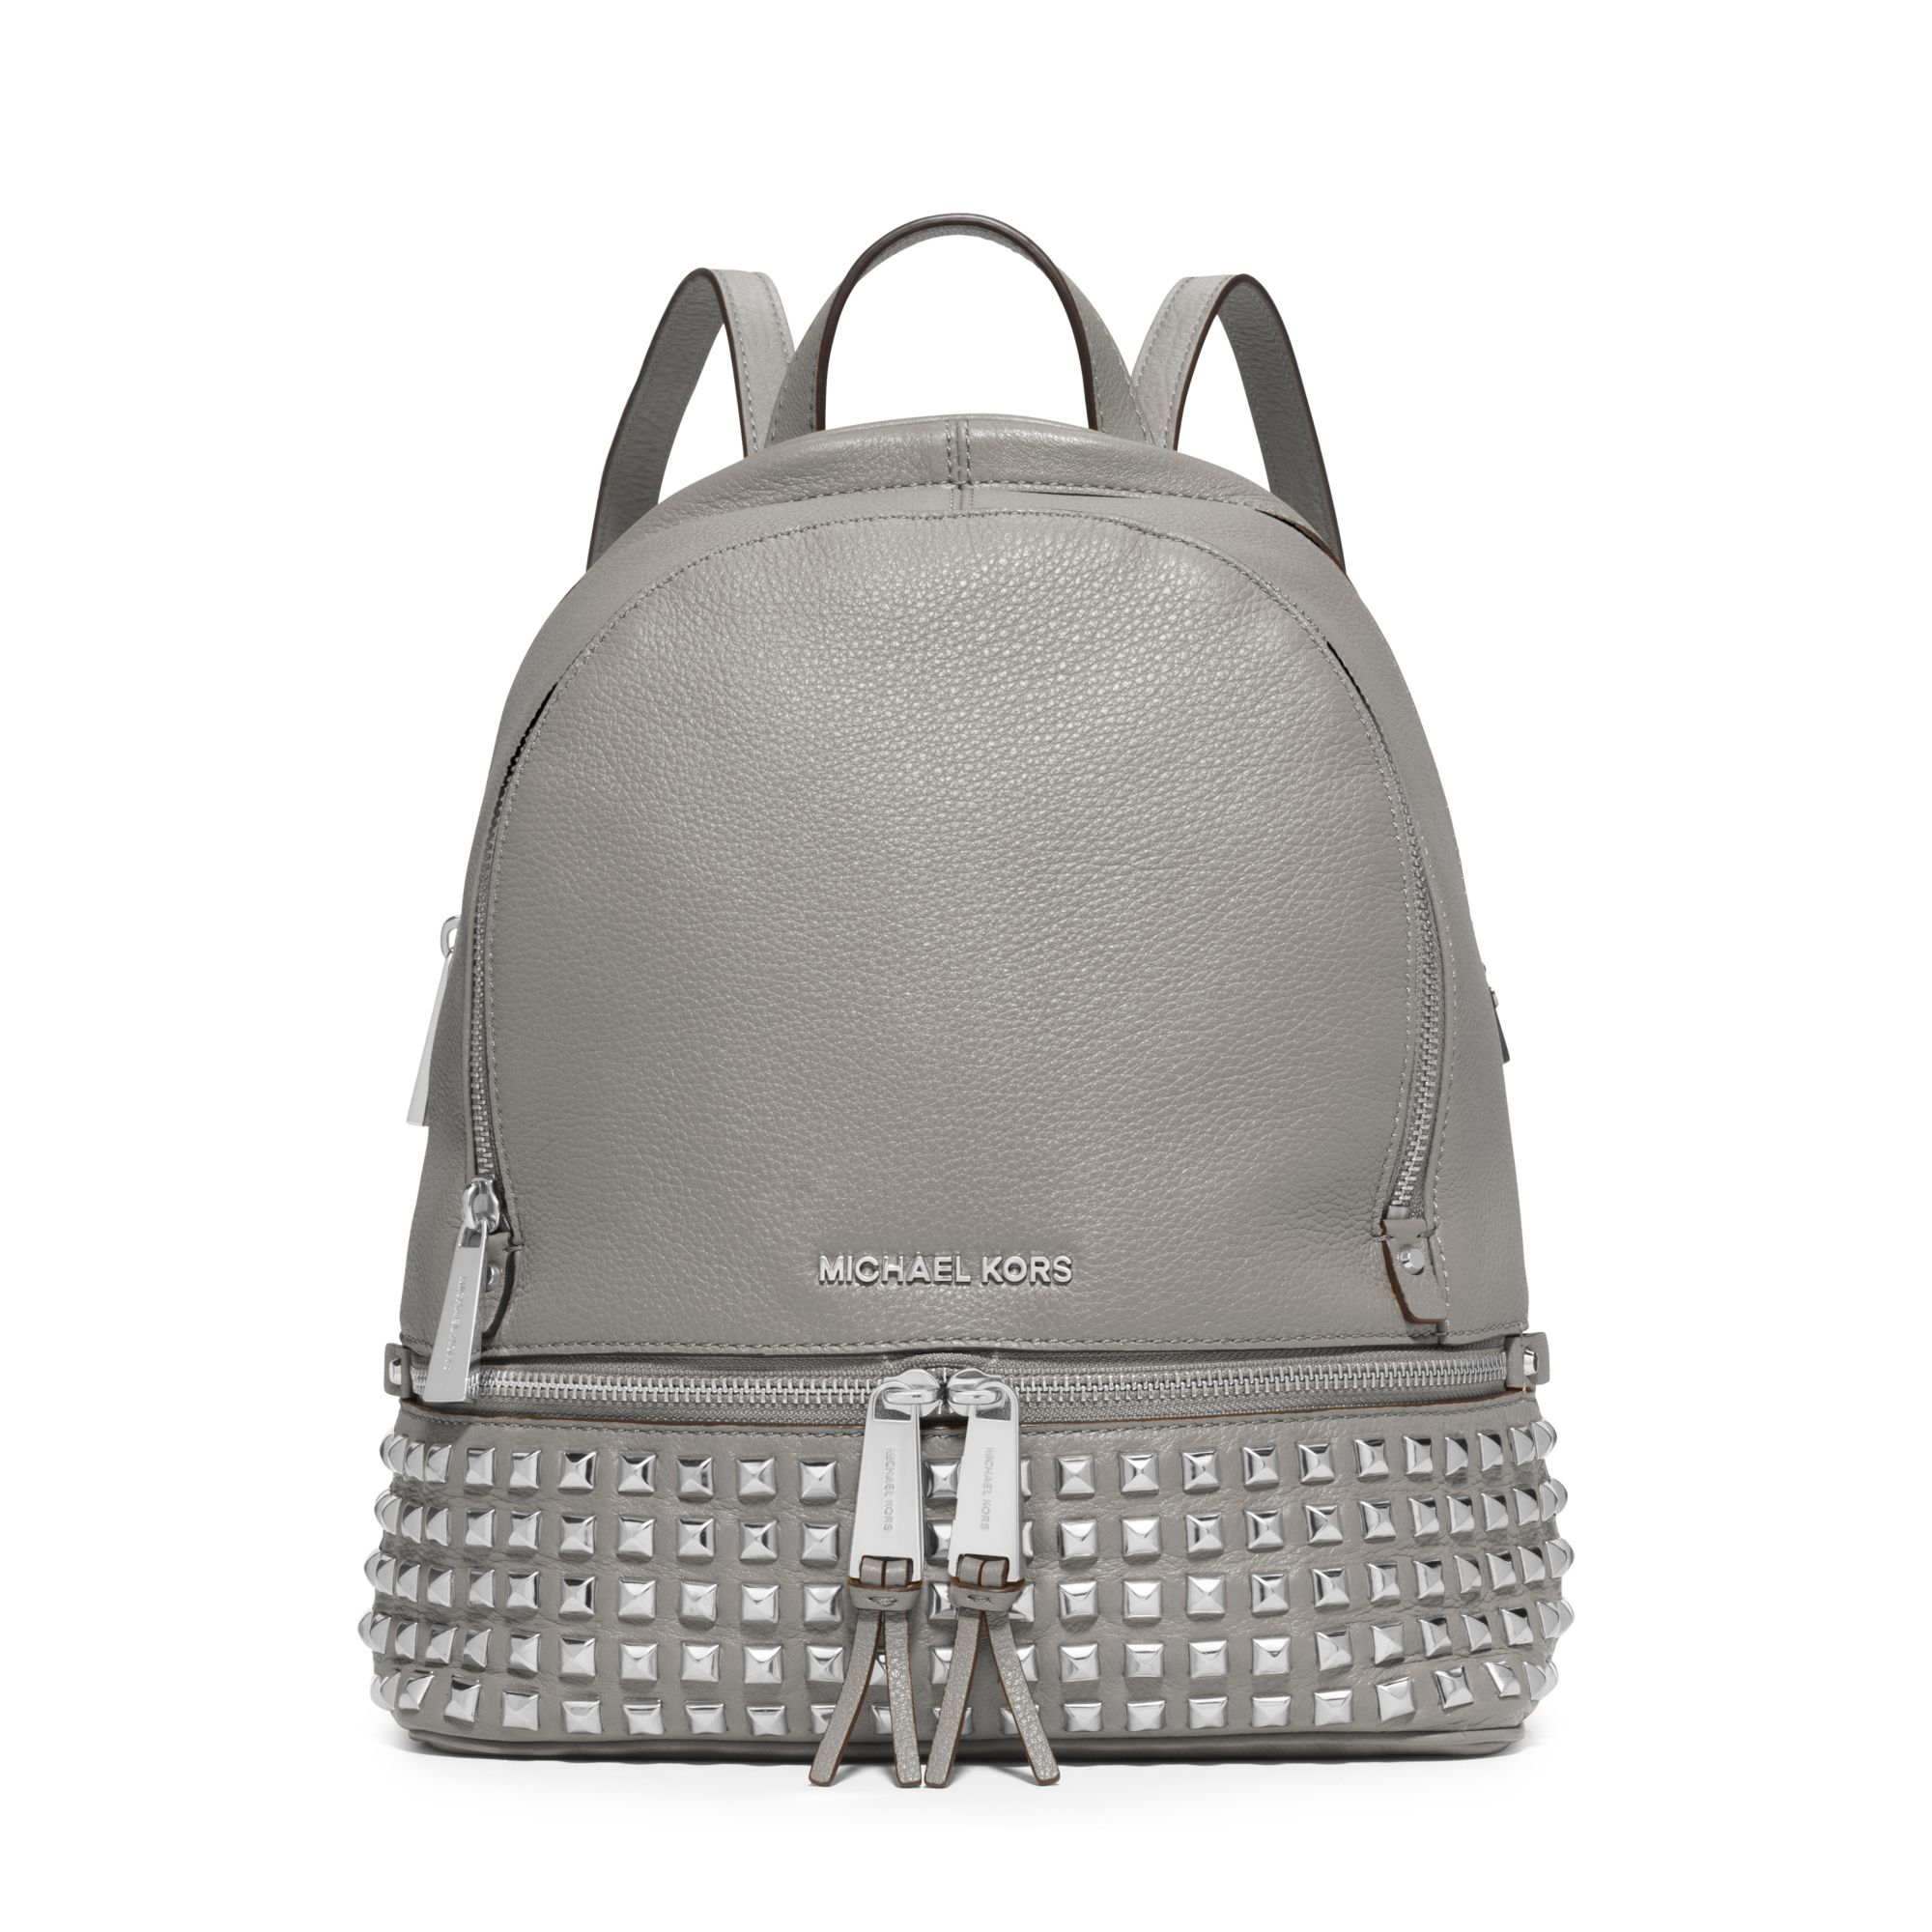 Michael kors Rhea Small Studded Leather Backpack in White | Lyst